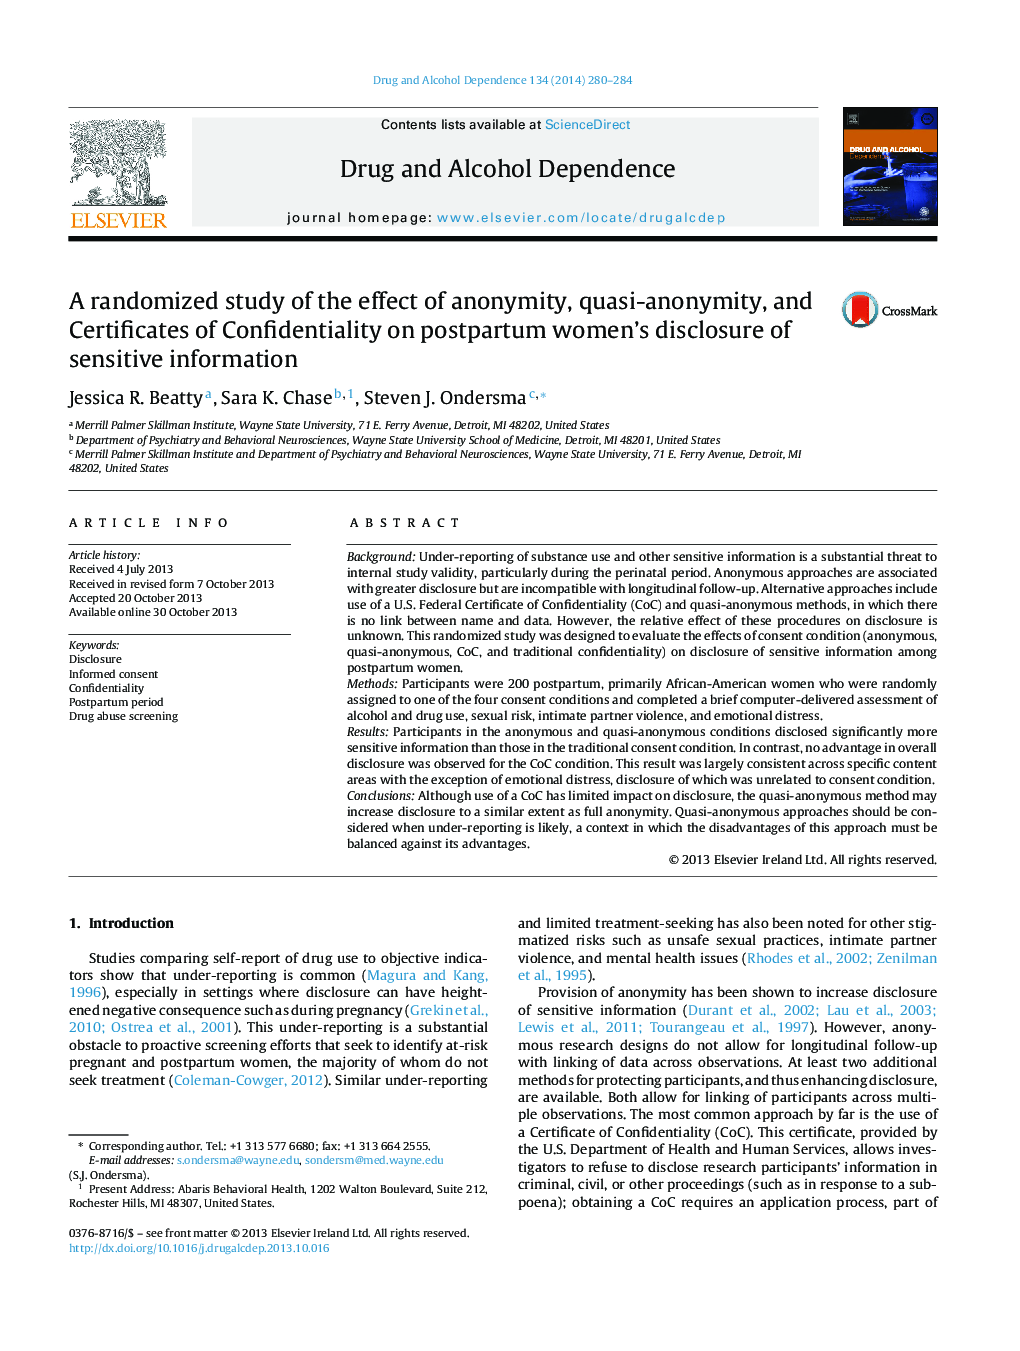 A randomized study of the effect of anonymity, quasi-anonymity, and Certificates of Confidentiality on postpartum women's disclosure of sensitive information